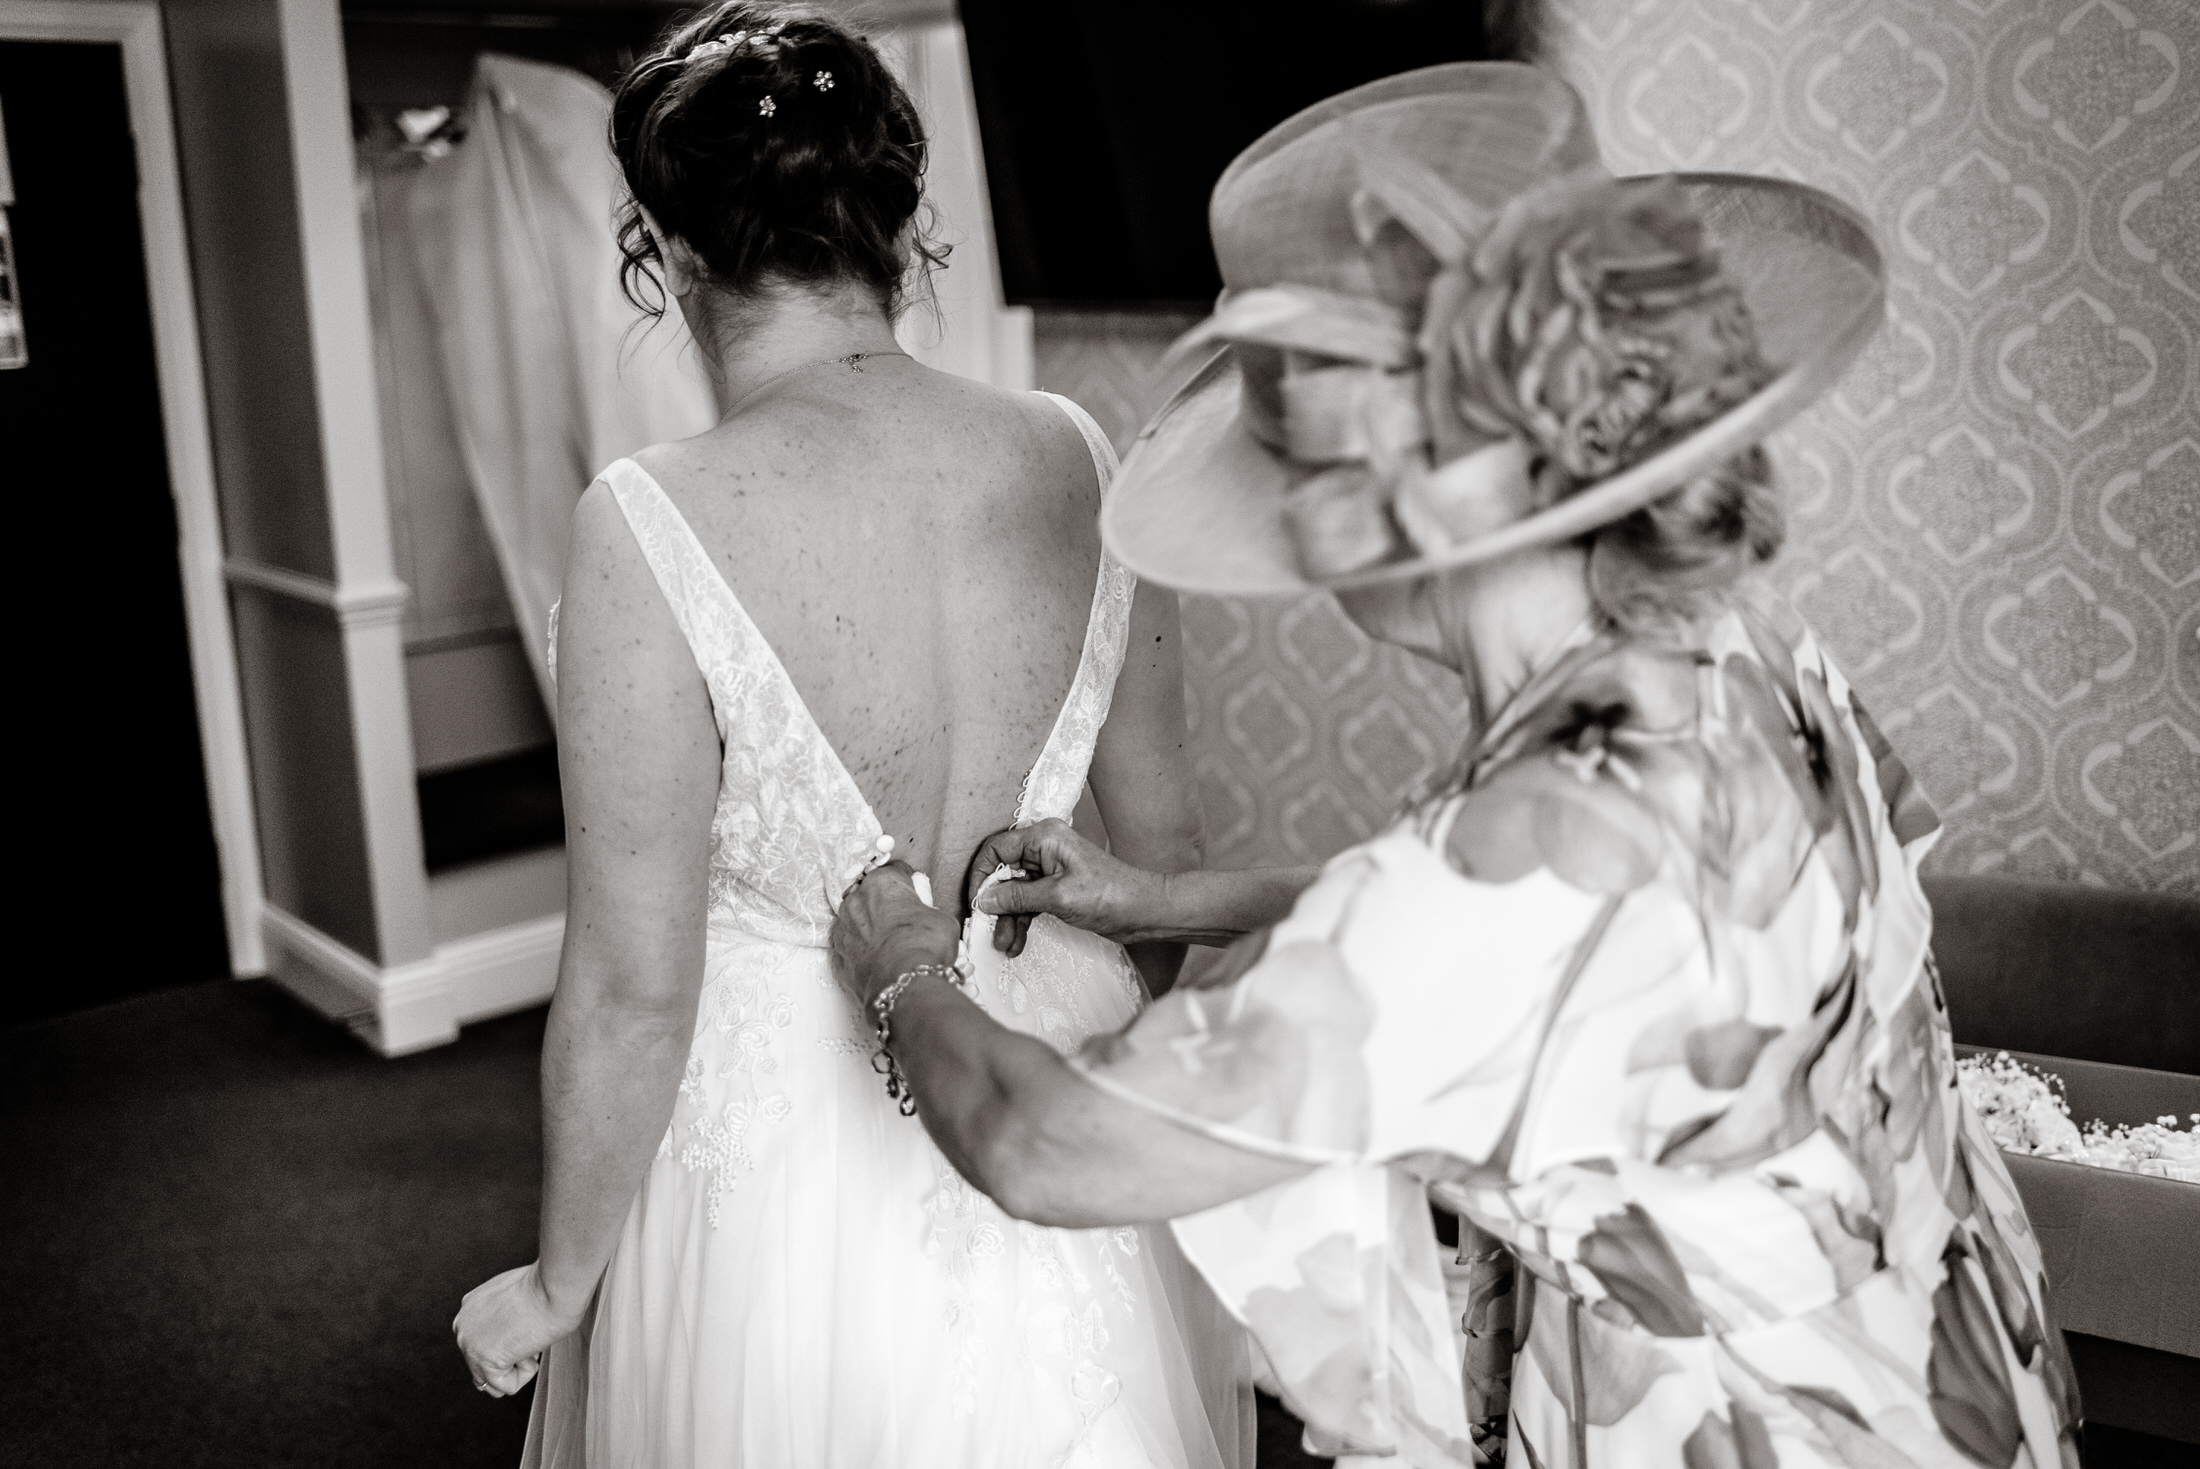 At the Brackenborough Hotel, a woman is assisting a bride in putting on her exquisite wedding dress.